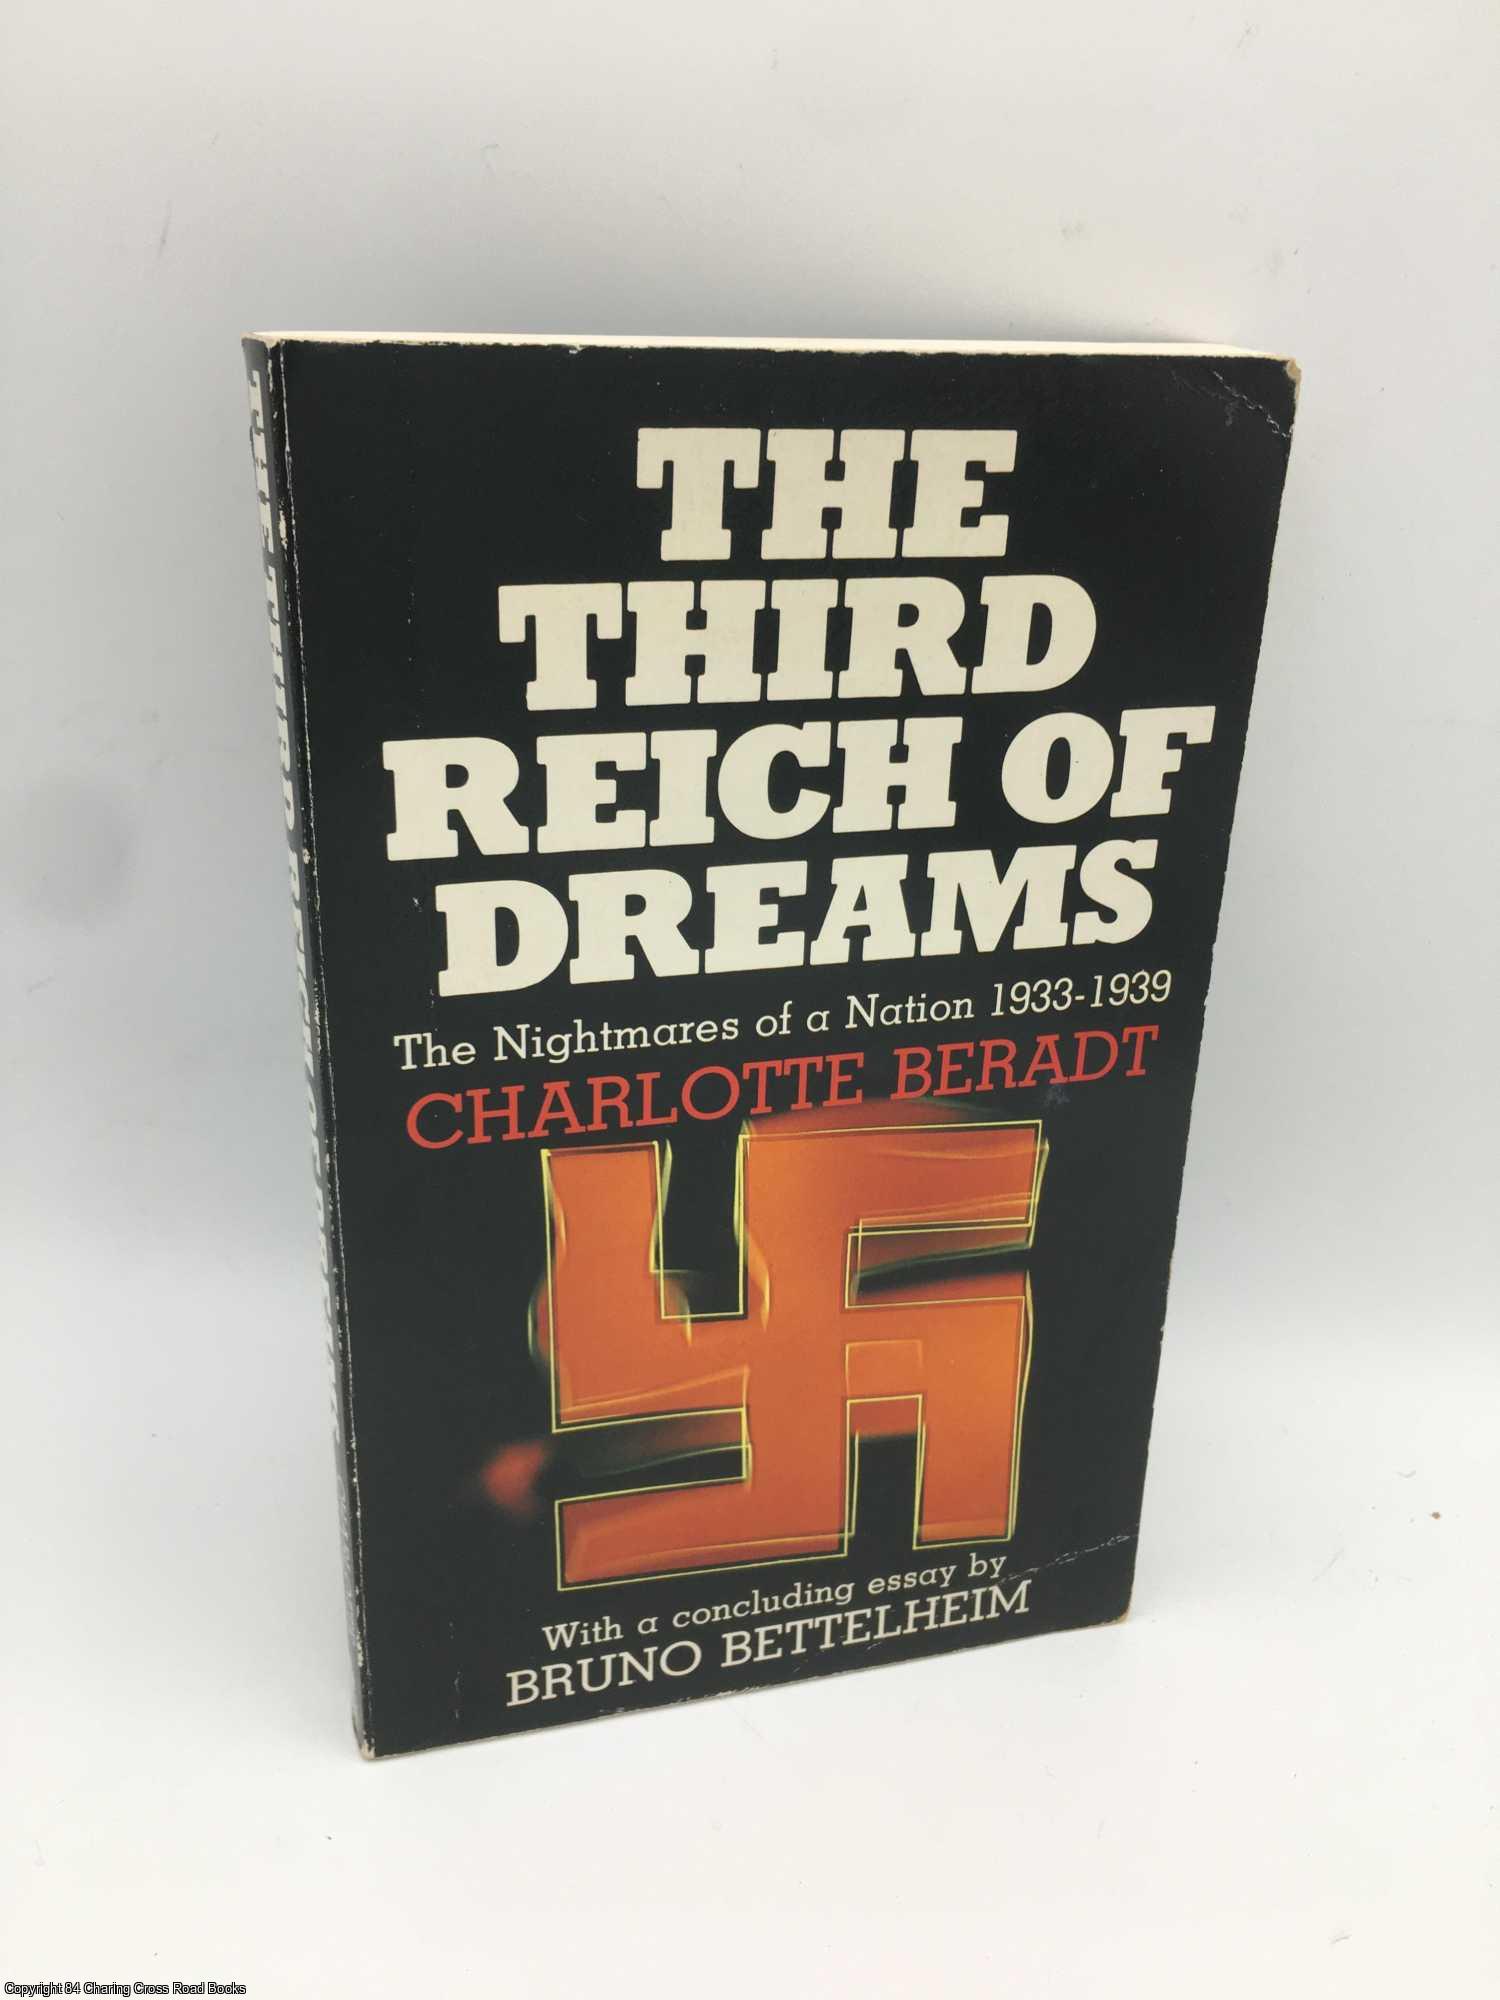 Beradt, Charlotte - Third Reich of Dreams: The Nightmares of a Nation, 1933-39